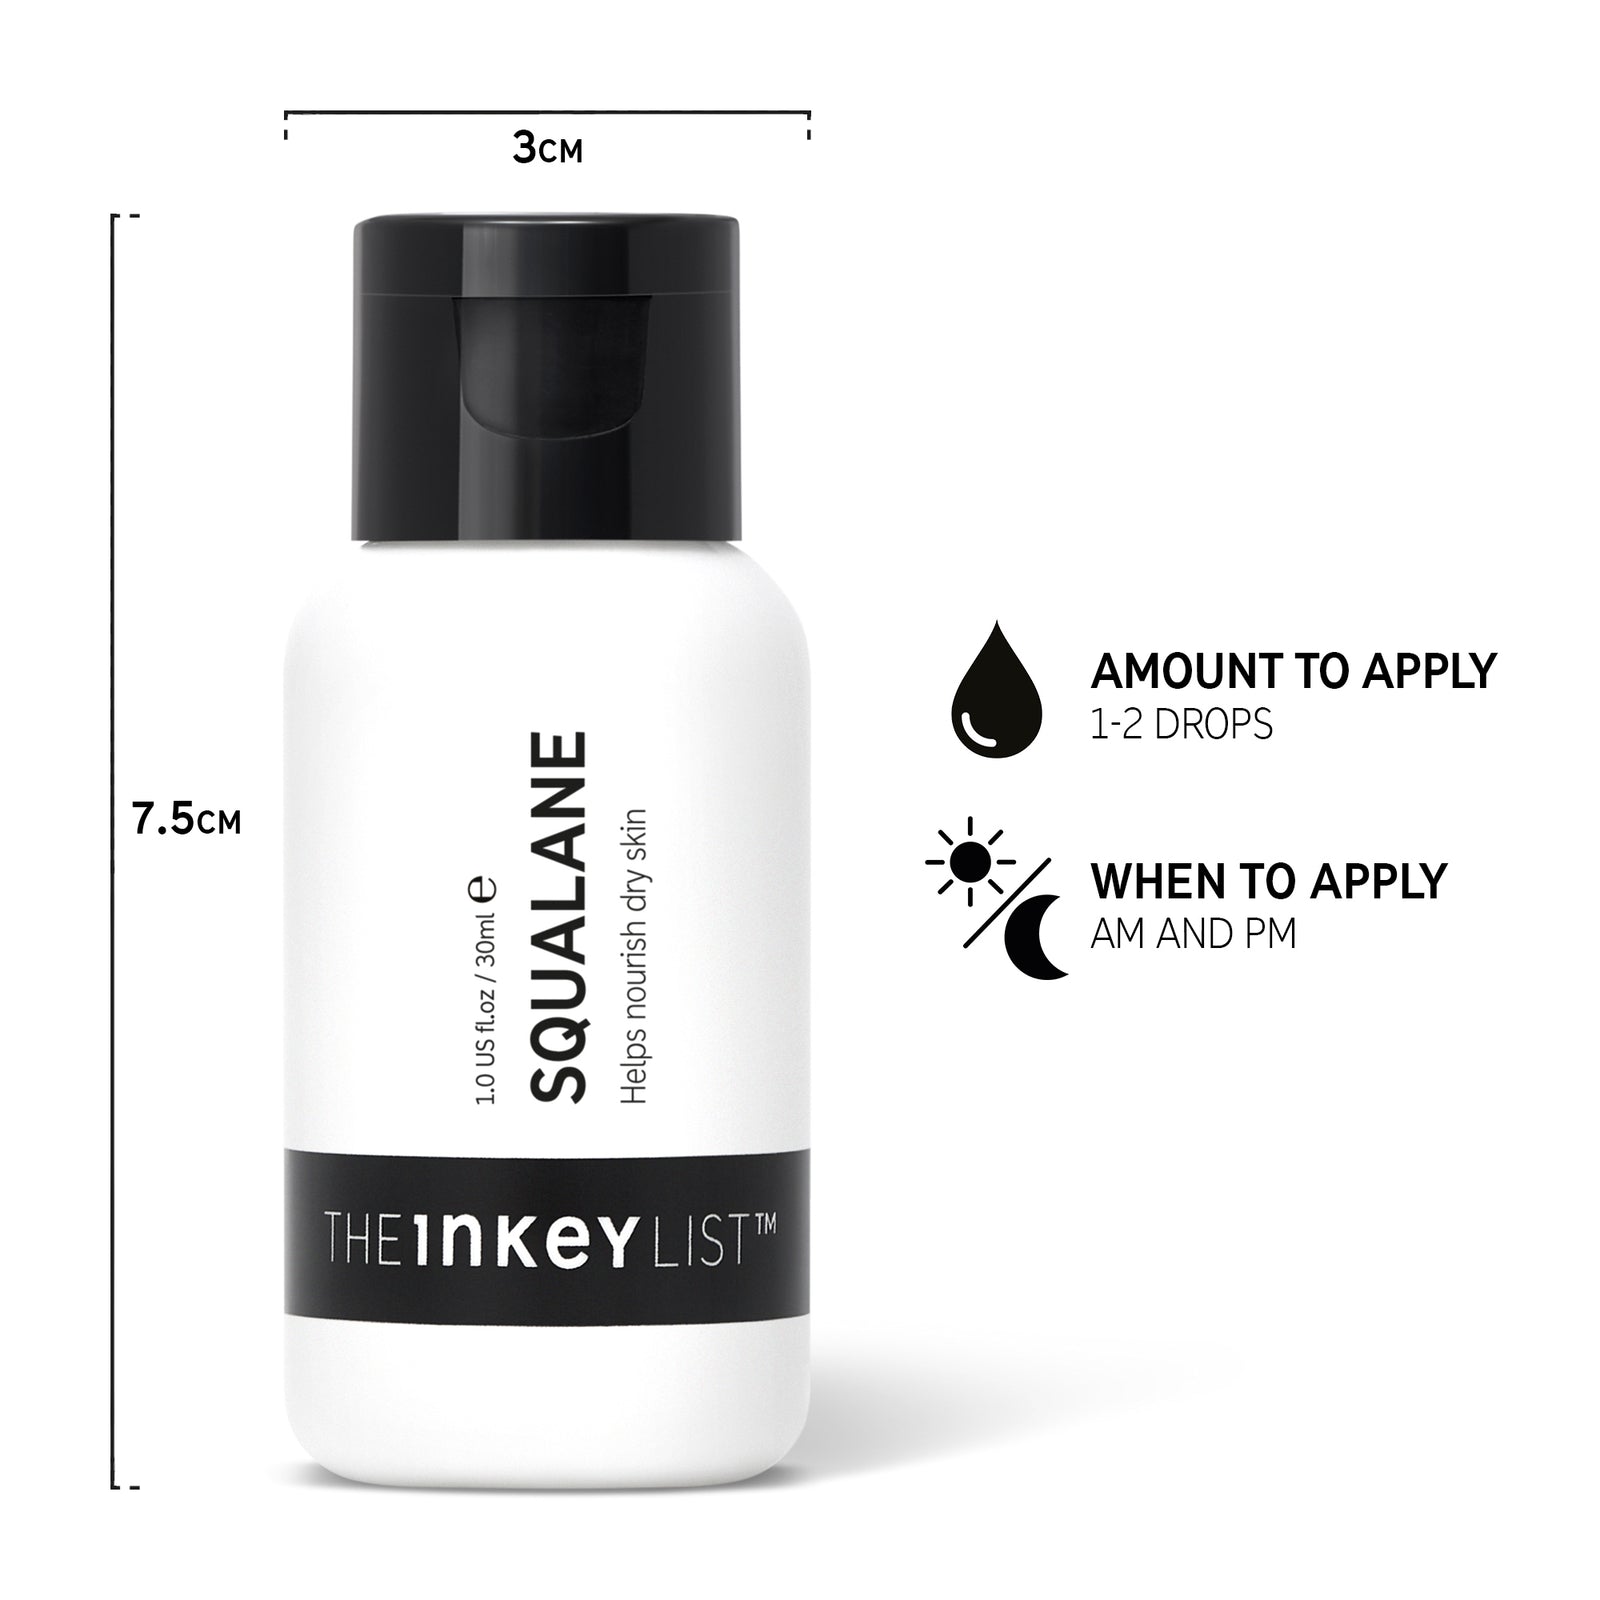 Squalane Oil bottle dimensions and info graphic when to apply in your routine and how much to apply with text explaining 'amount to apply (1-2 drops)' and 'when to apply (AM and PM)'